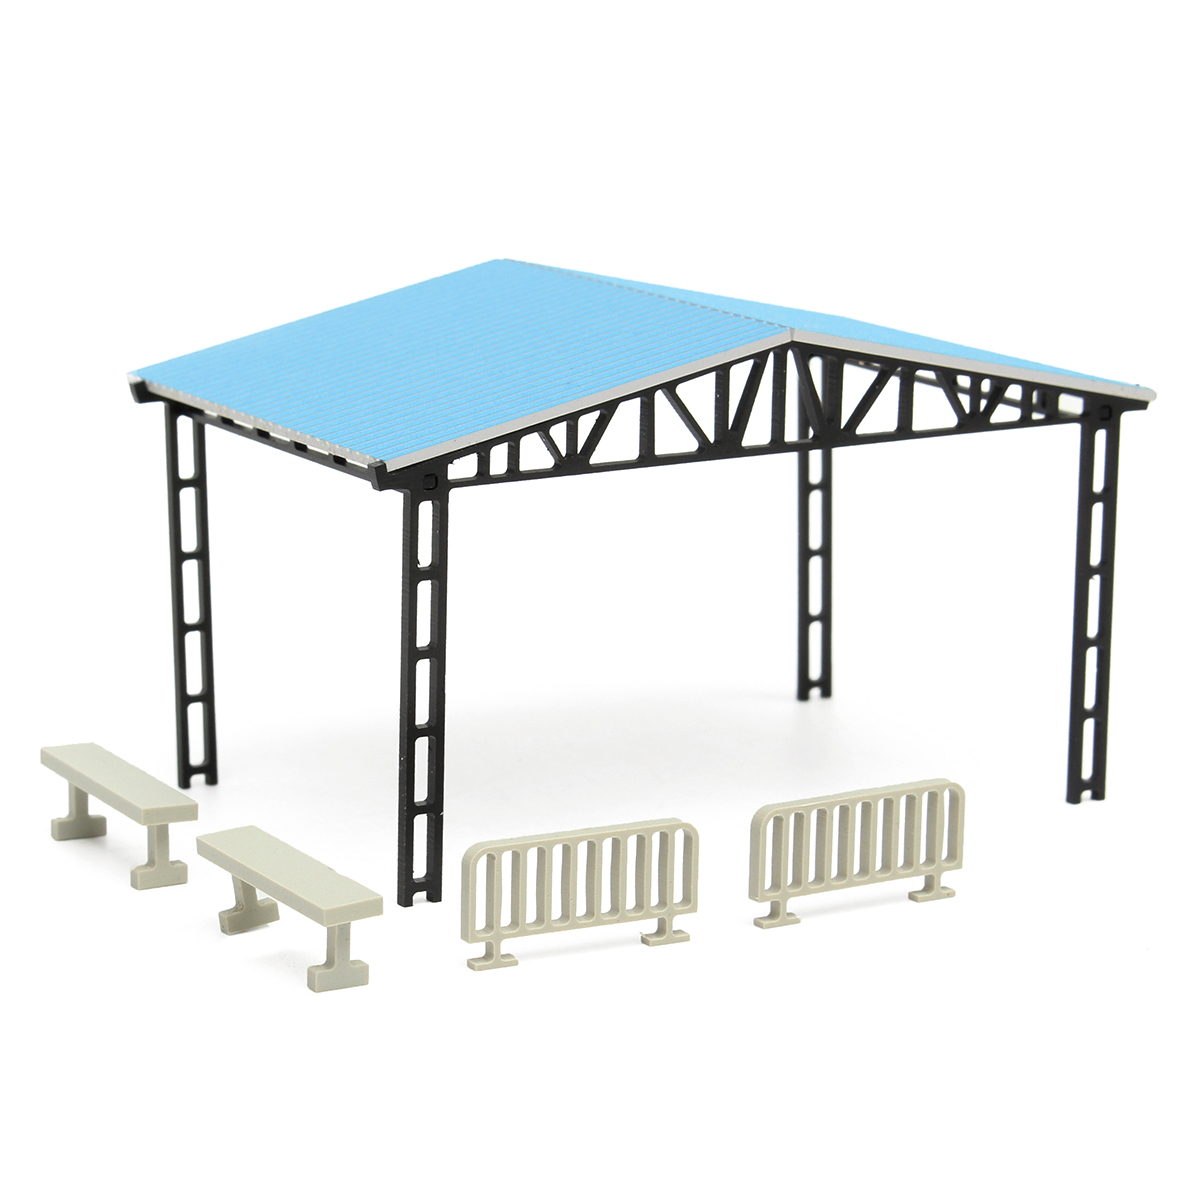 Model-Layout-Building-Parking-Shed-With-2-Fences-2-Benches-HO-Scale-187-Kit-1093333